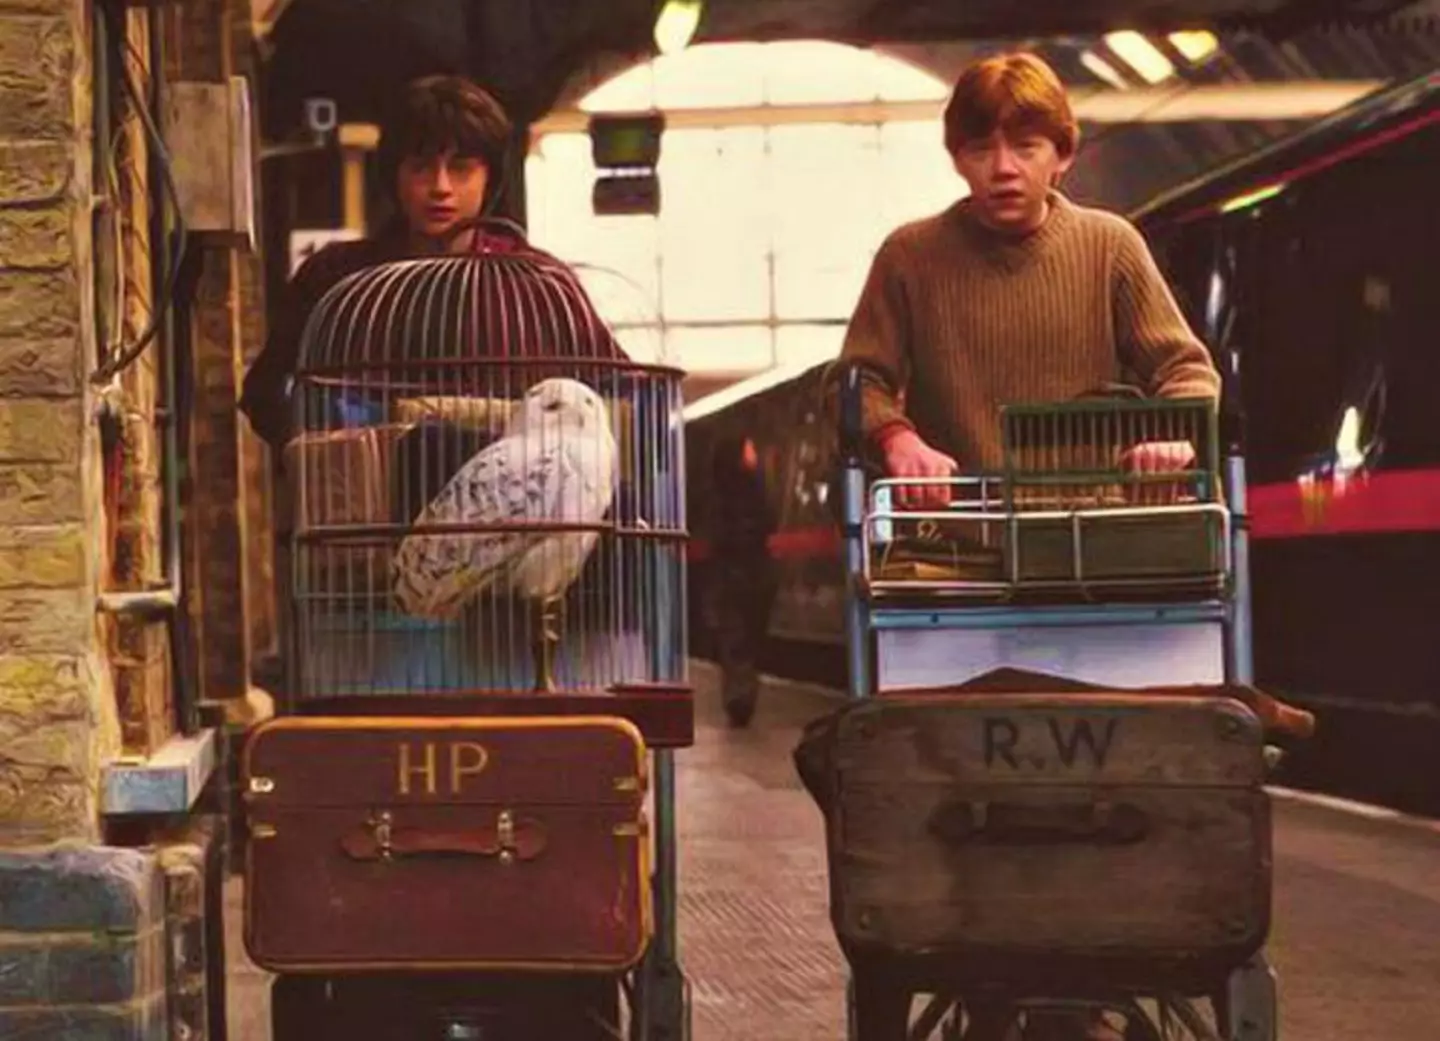 Daniel Radcliffe and Rupert Grint in Harry Potter and The Philosopher's Stone.